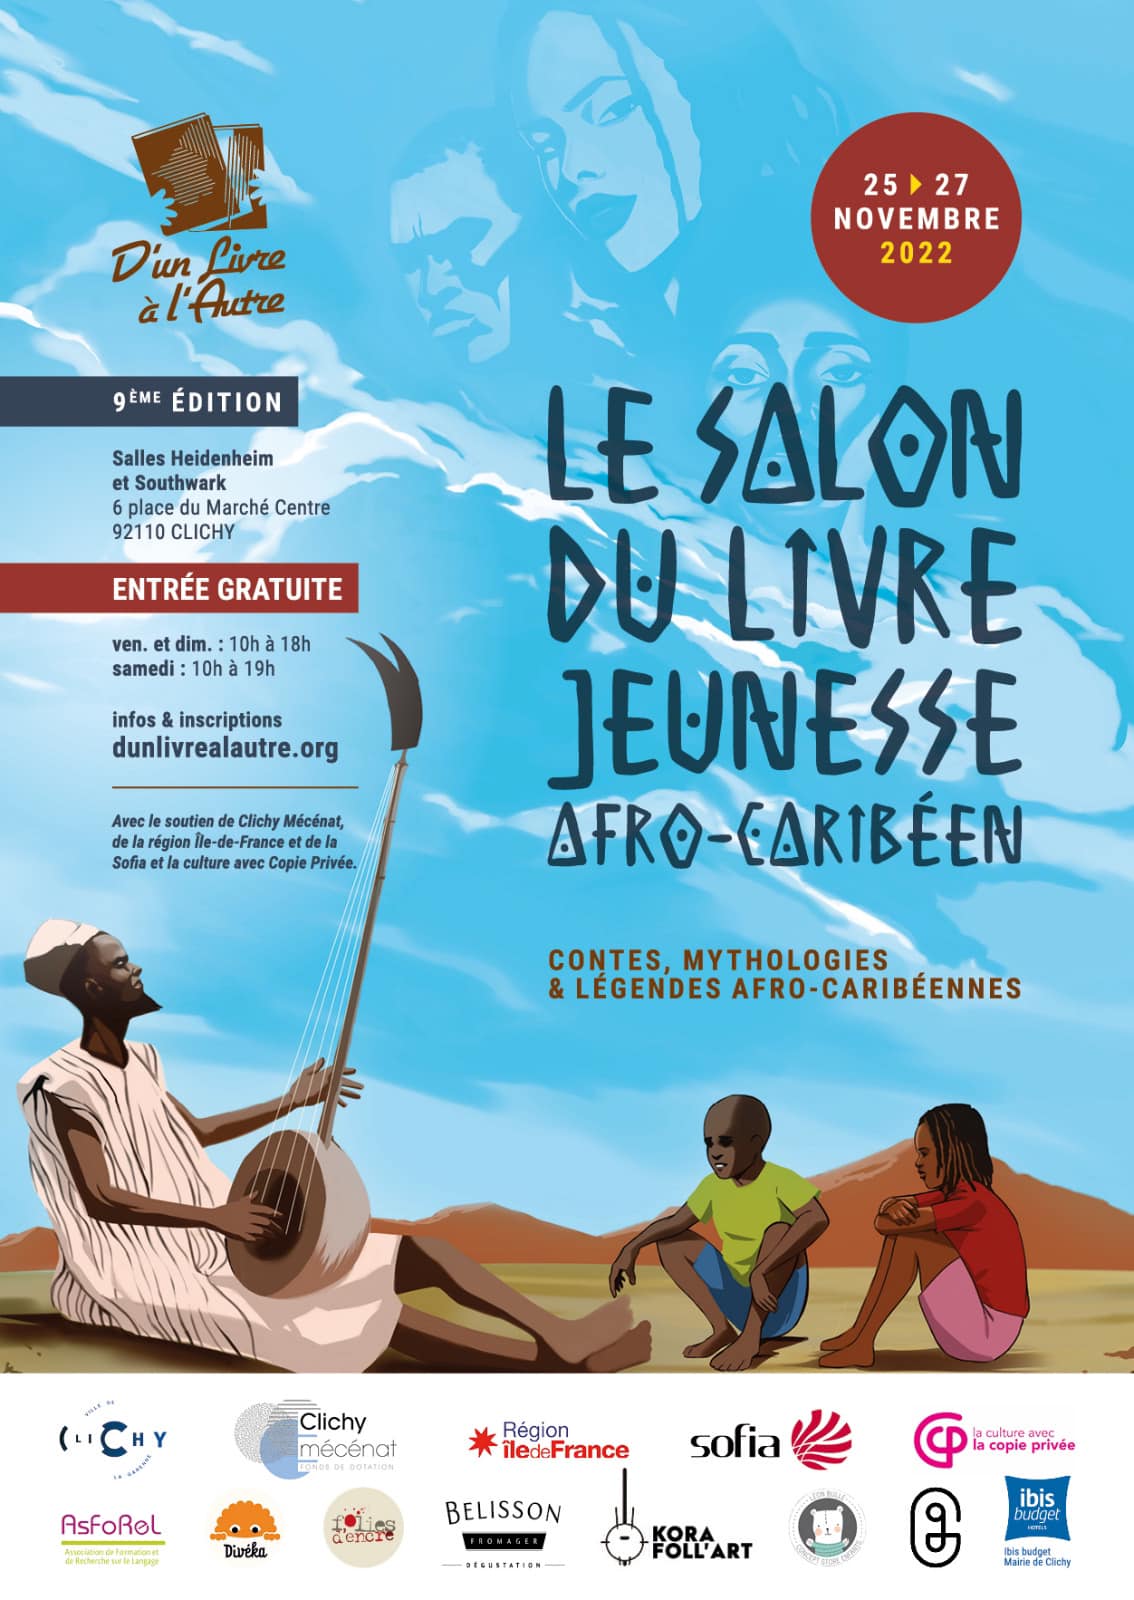 You are currently viewing SALON DU LIVRE JEUNESSE AFRO-CARIBEEN 2022